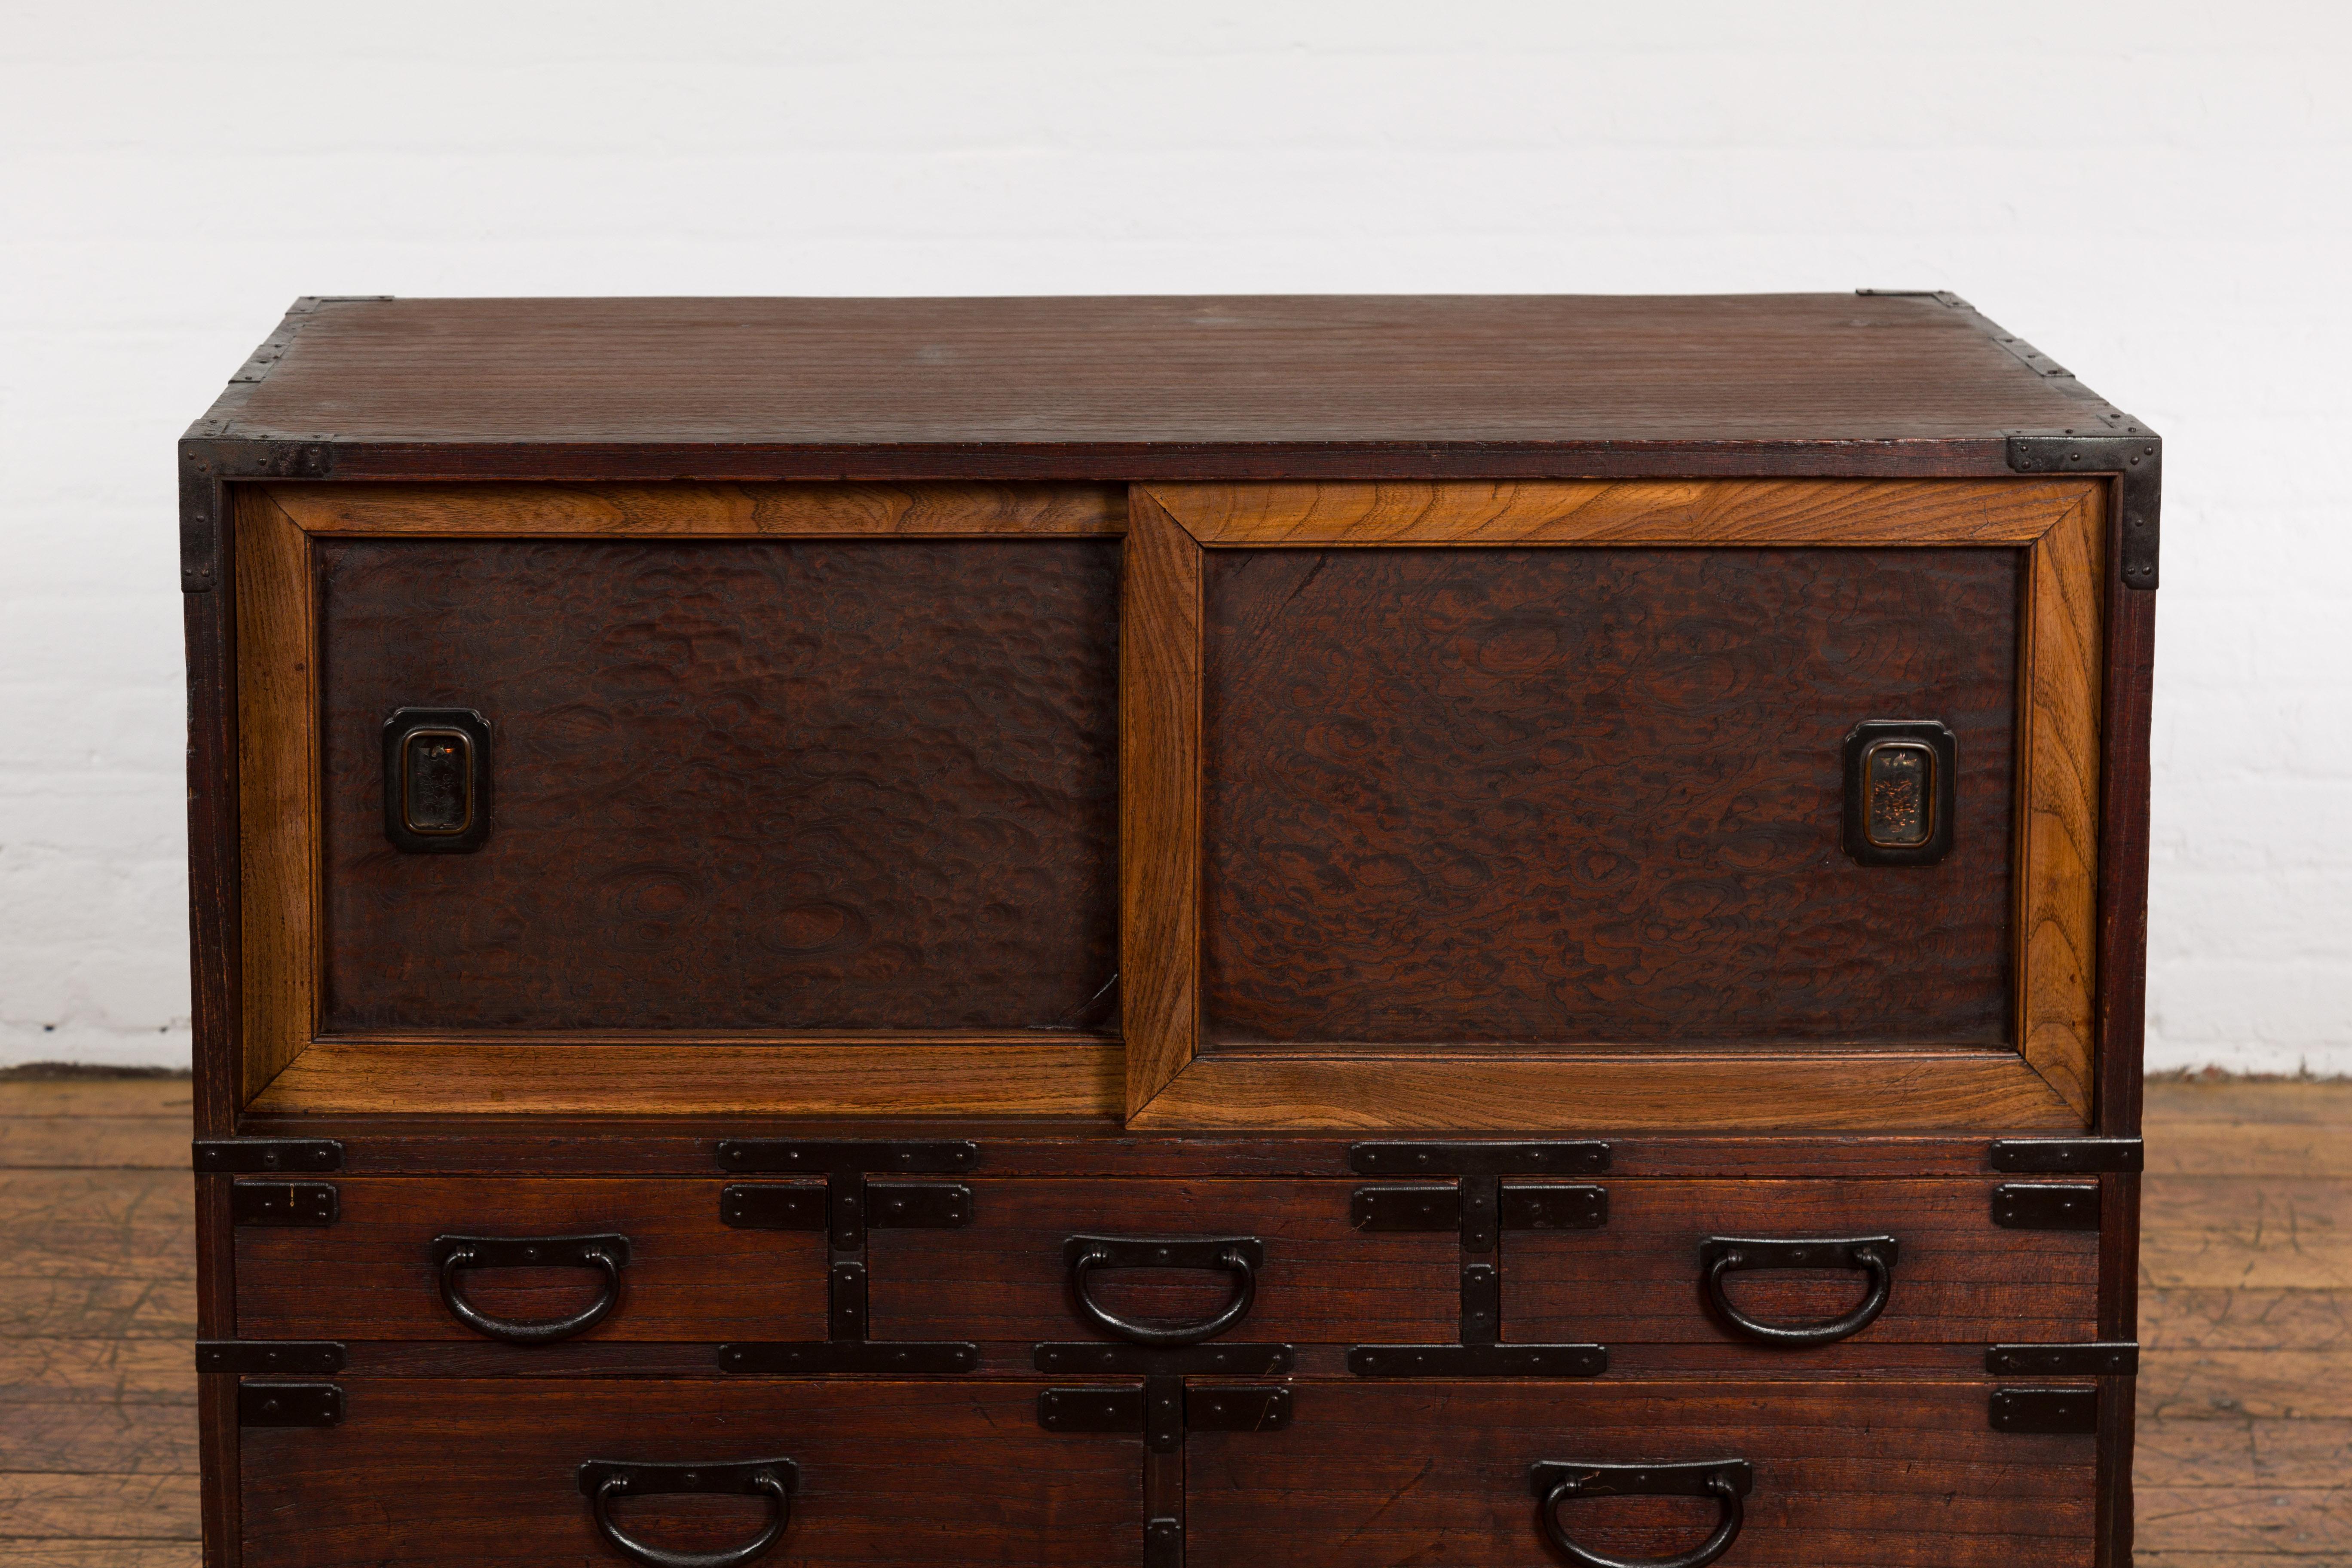 Japanese Meiji Period 19th Century Tansu Chest with Sliding Chest and Drawers For Sale 1